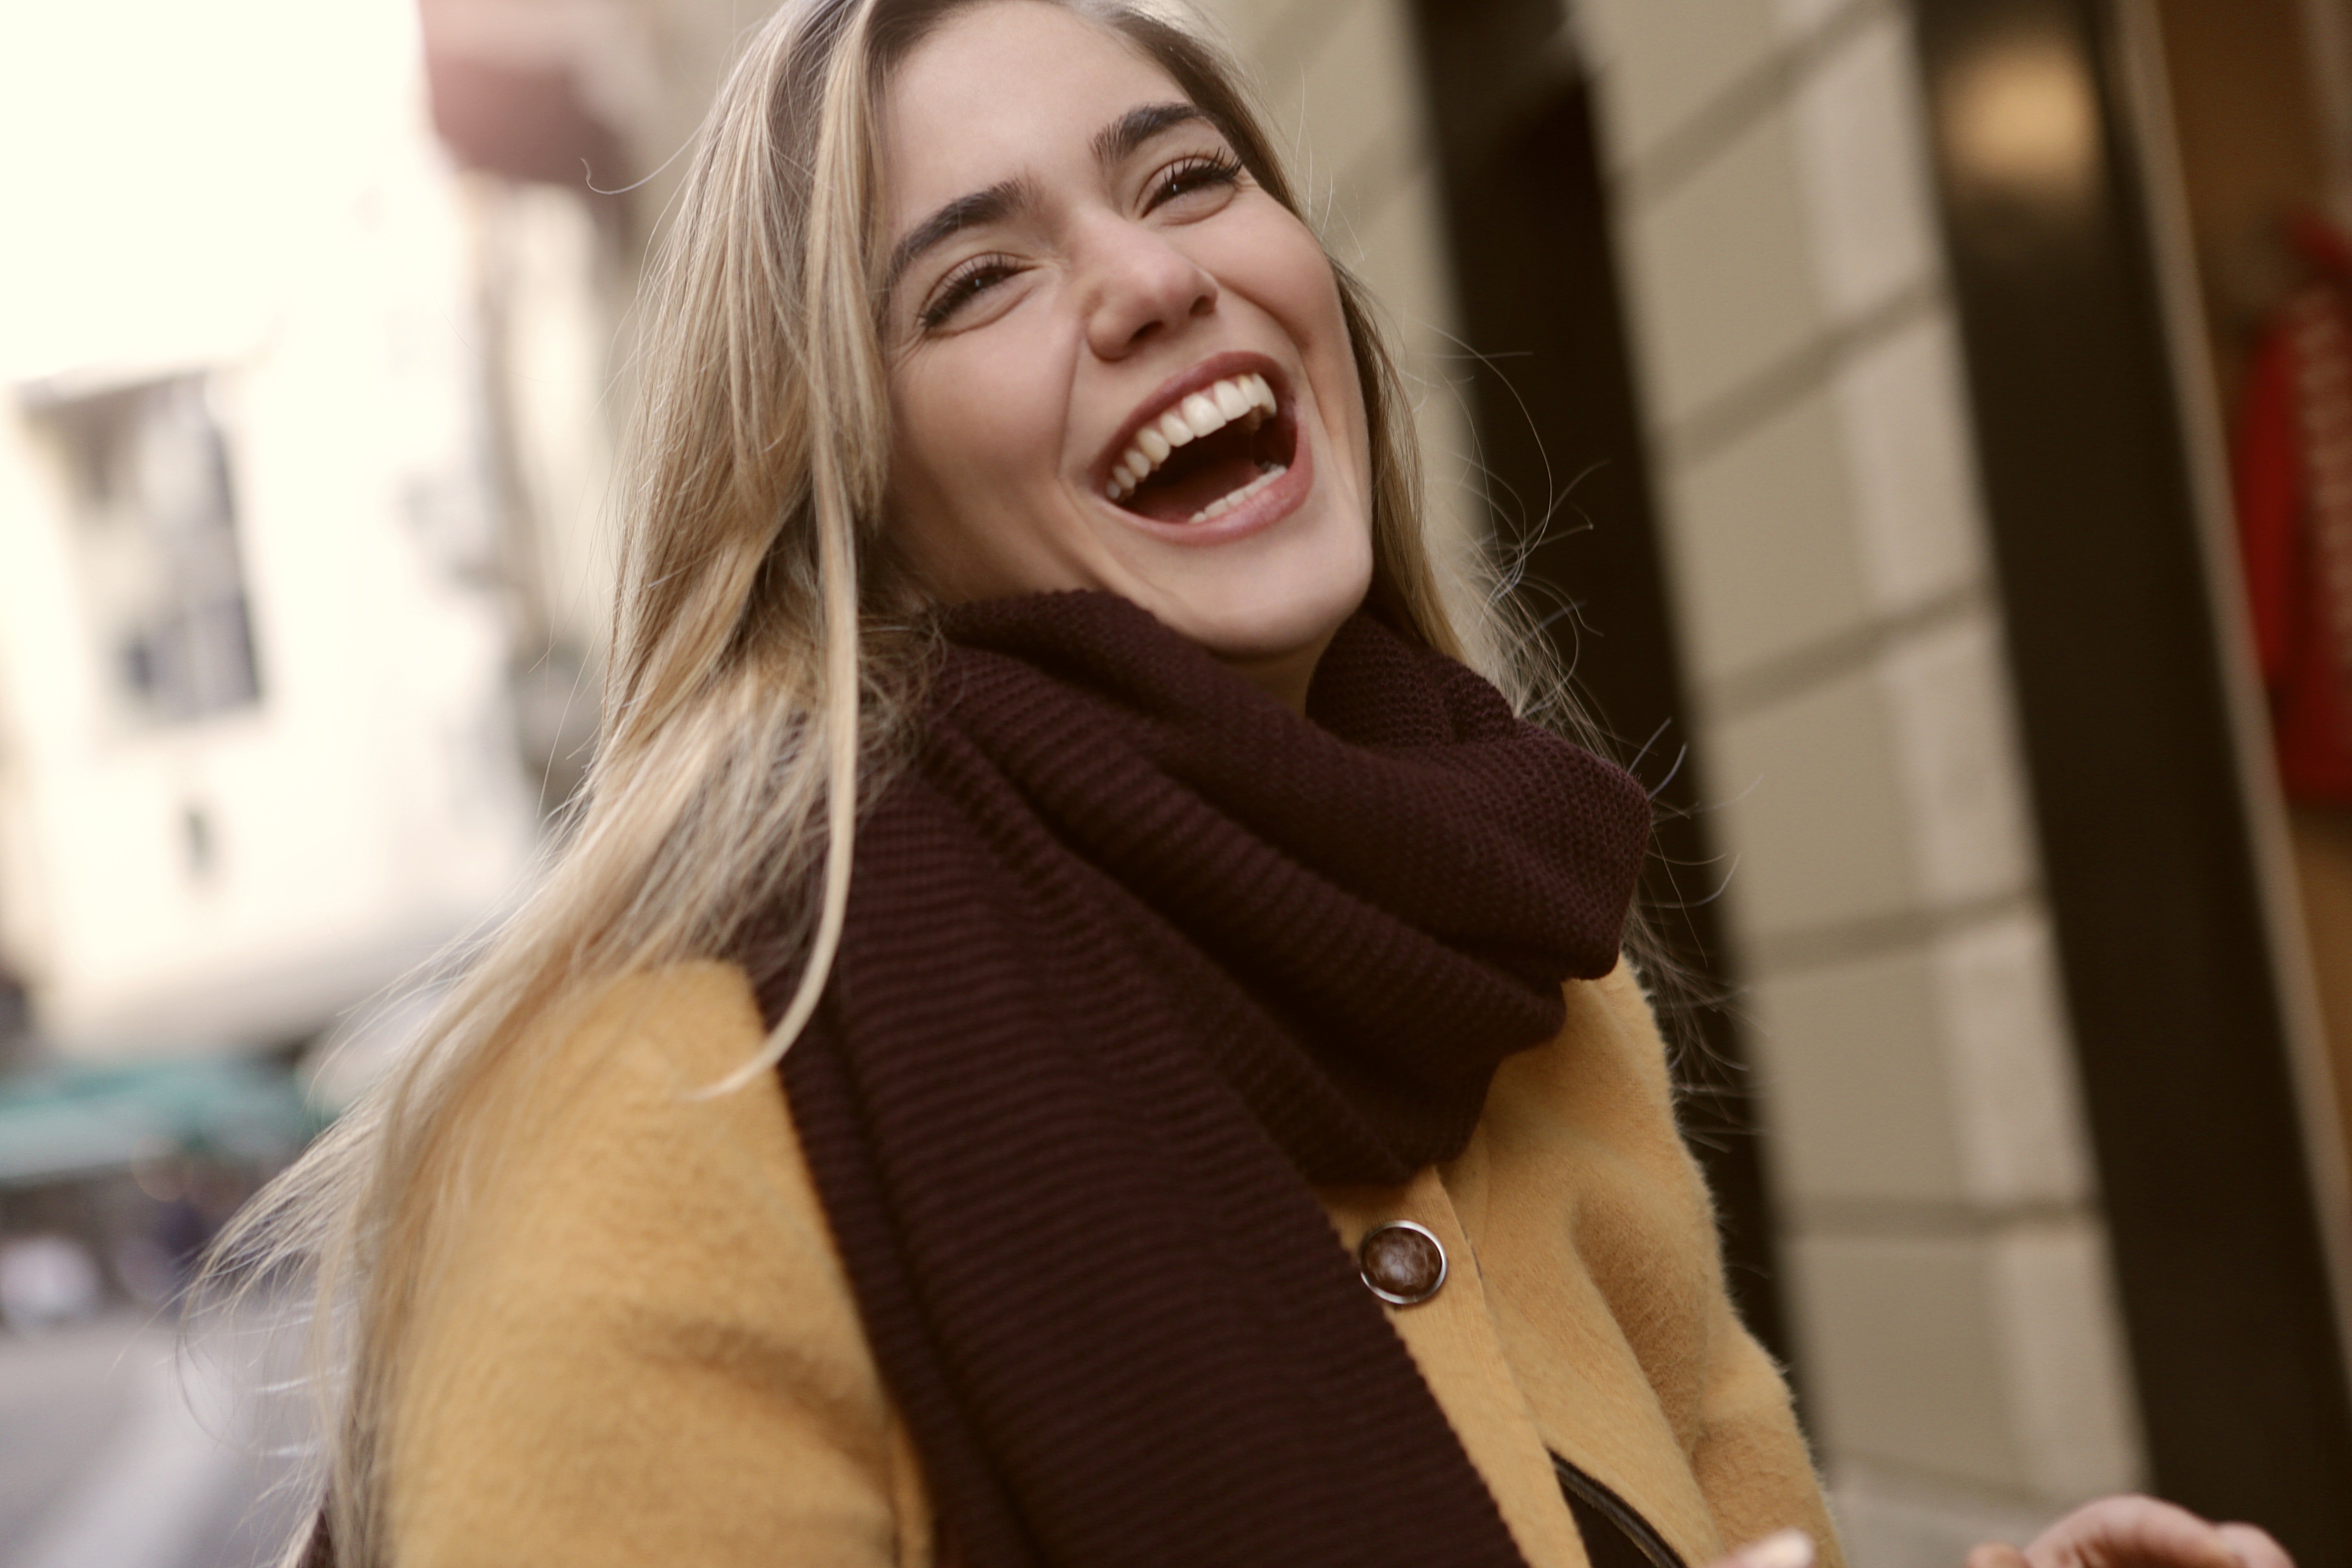 A woman laughing because laughter boosts the immune system | Source: Pexels